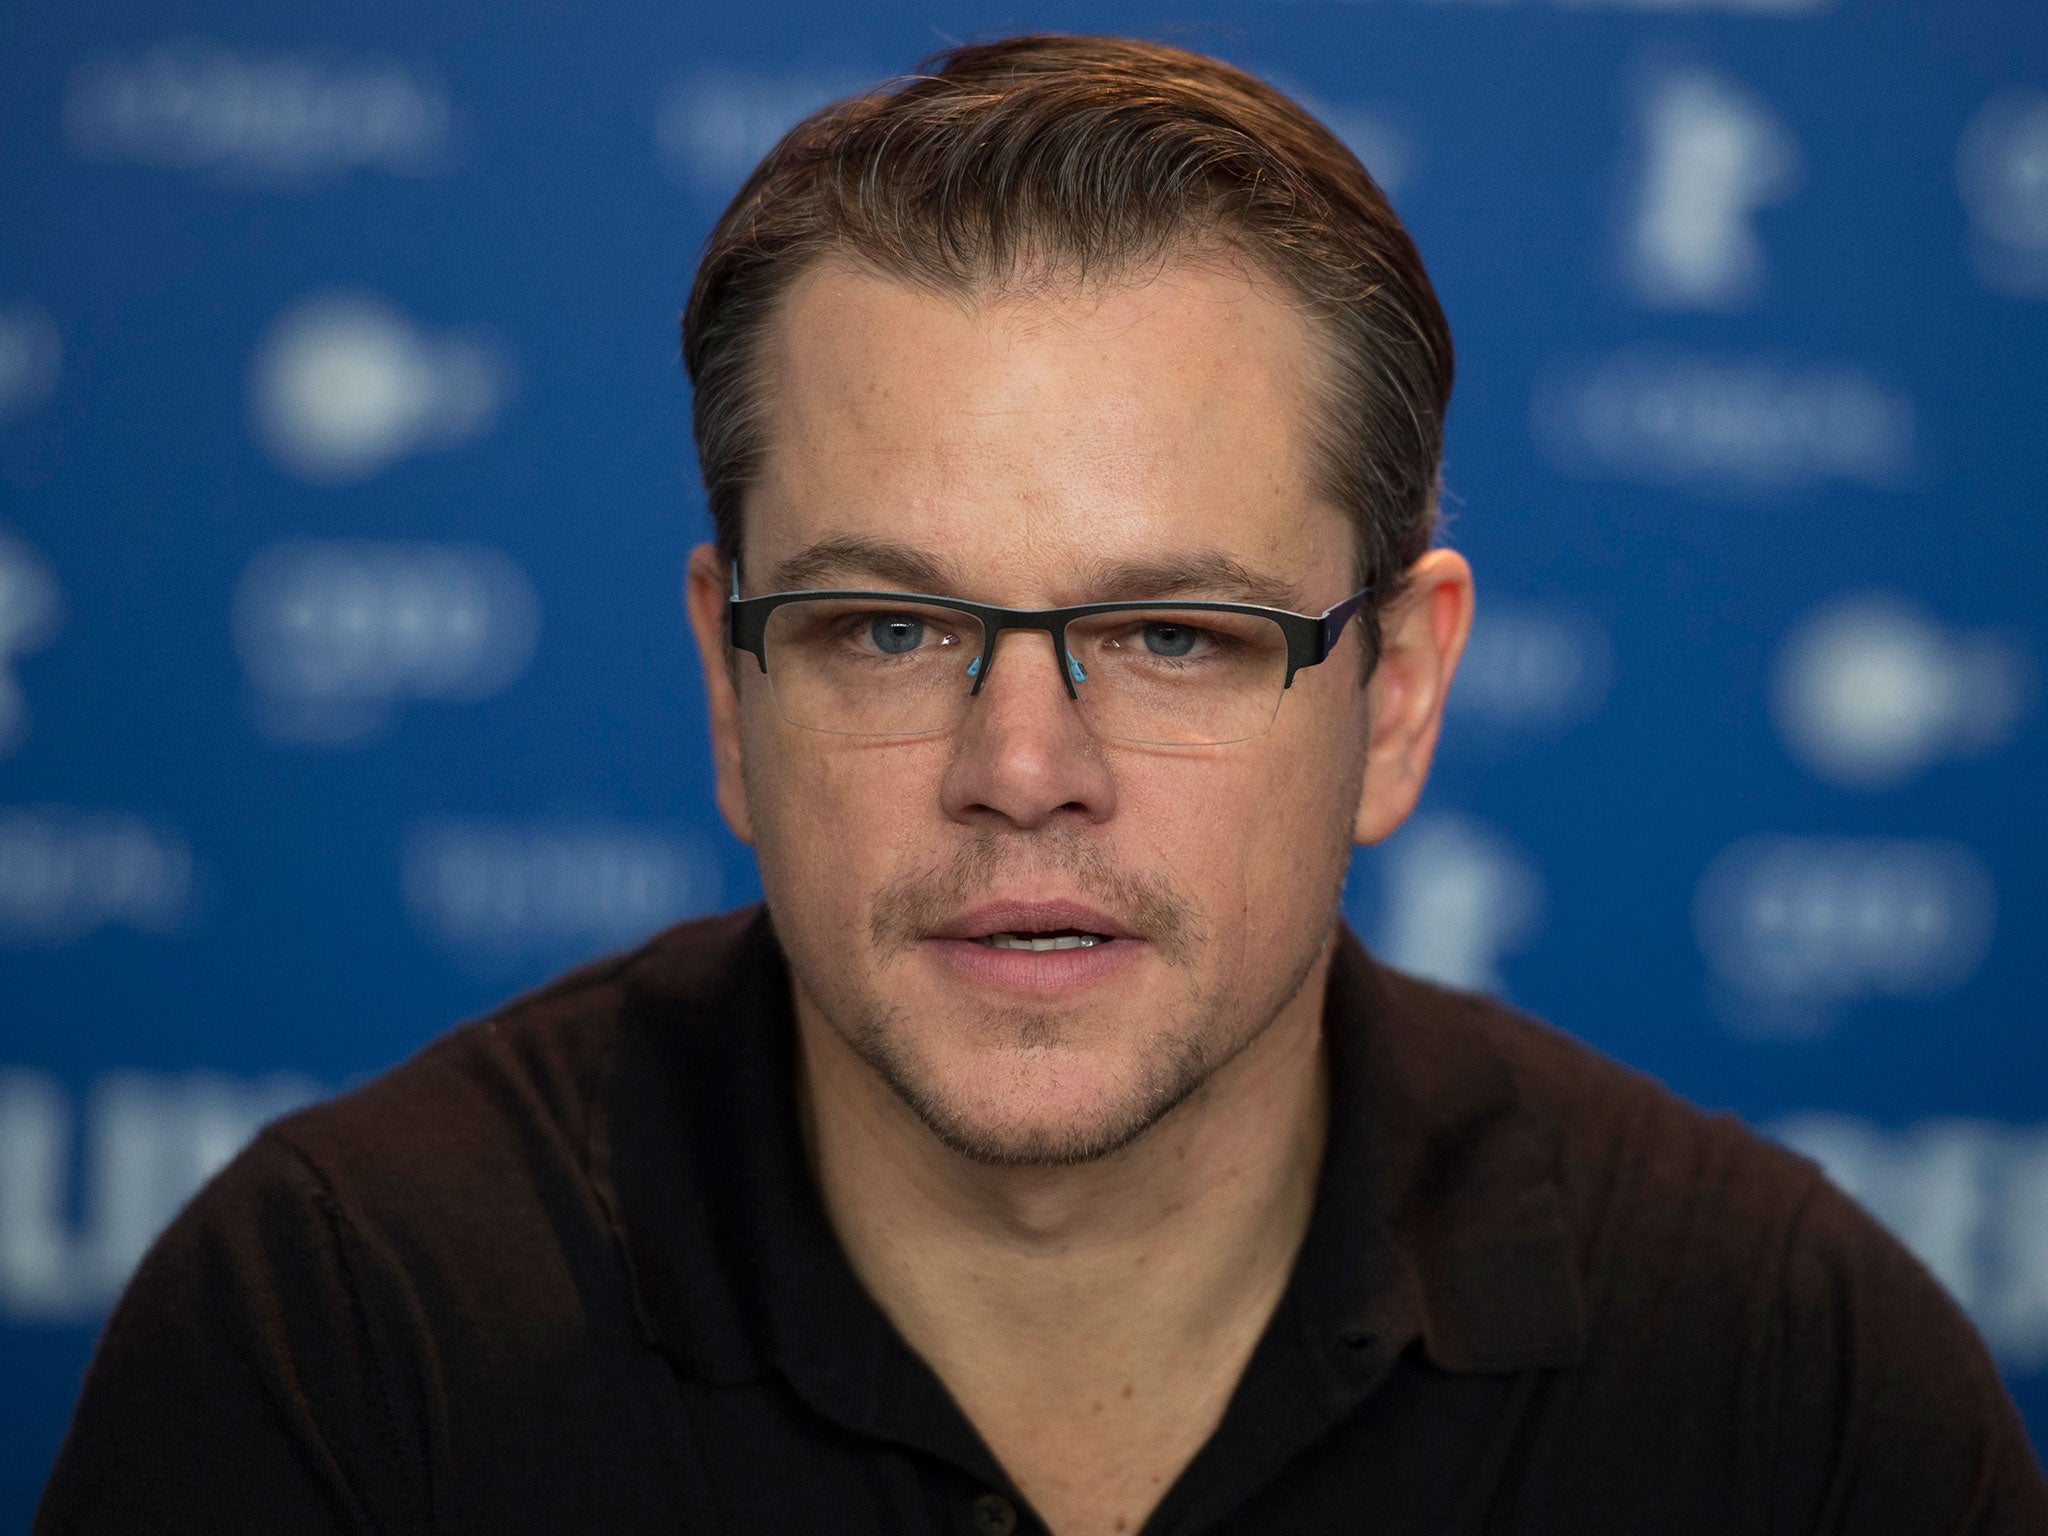 Matt Damon apologises for offending people with comments about